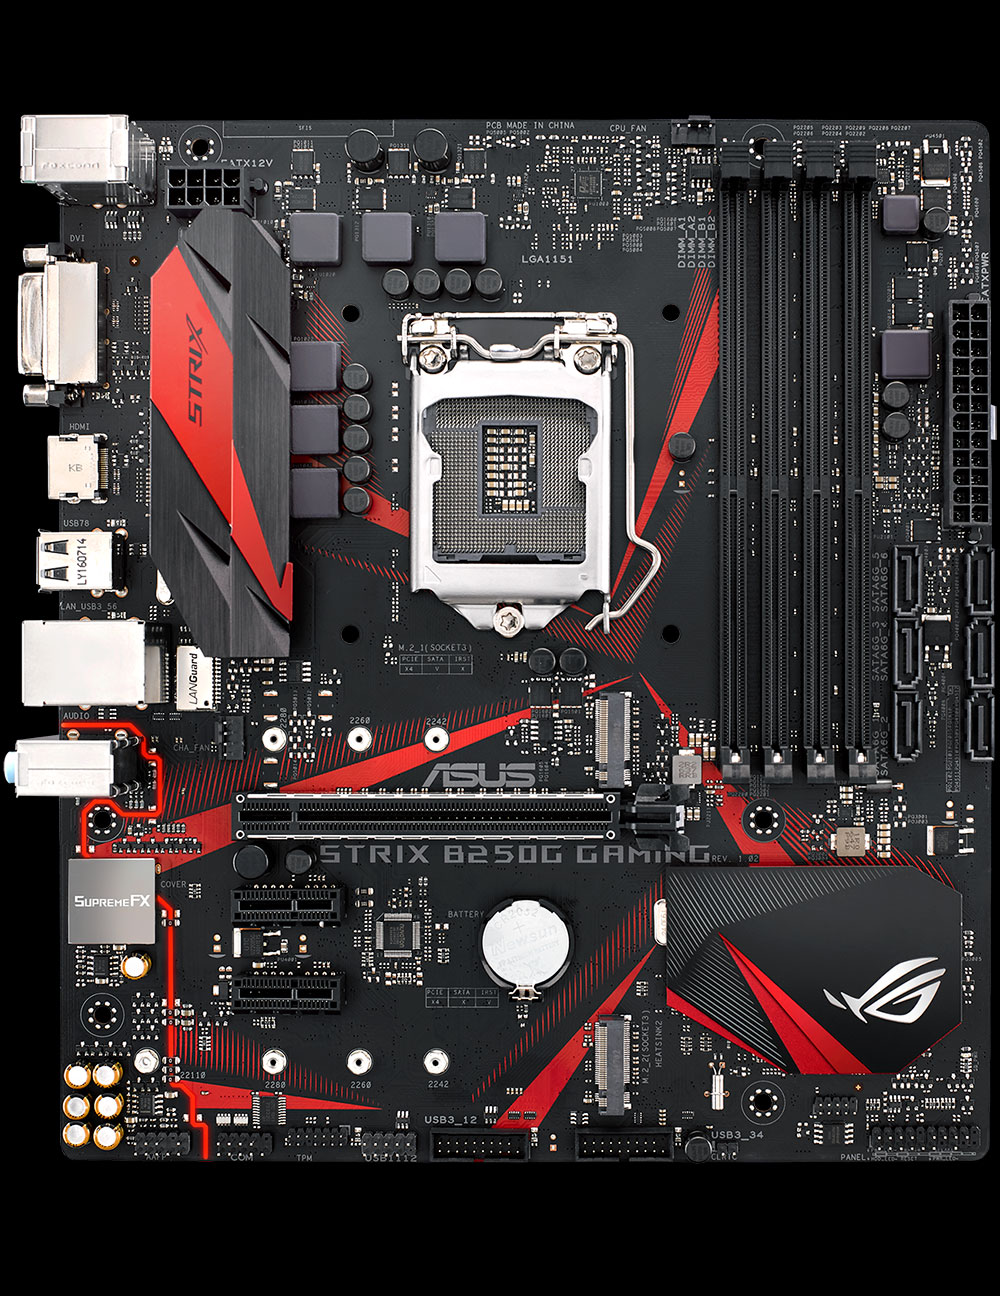 Introducing the ROG Strix B250G and B250H Gaming motherboards